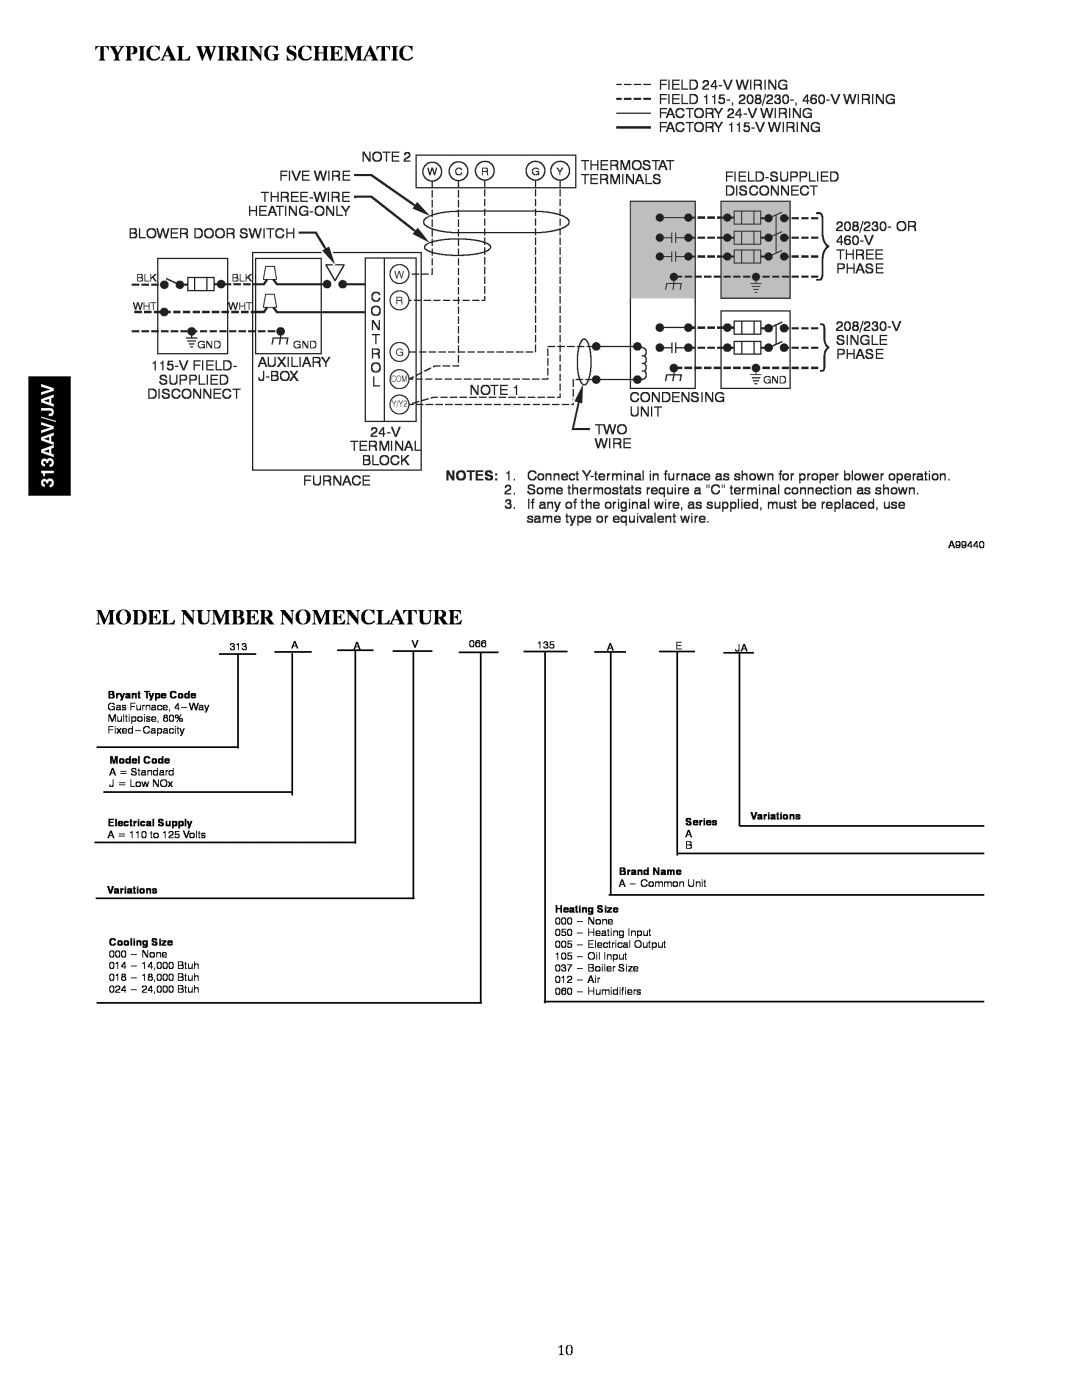 Bryant manual Typical Wiring Schematic, Model Number Nomenclature, 313AAV/JAV 